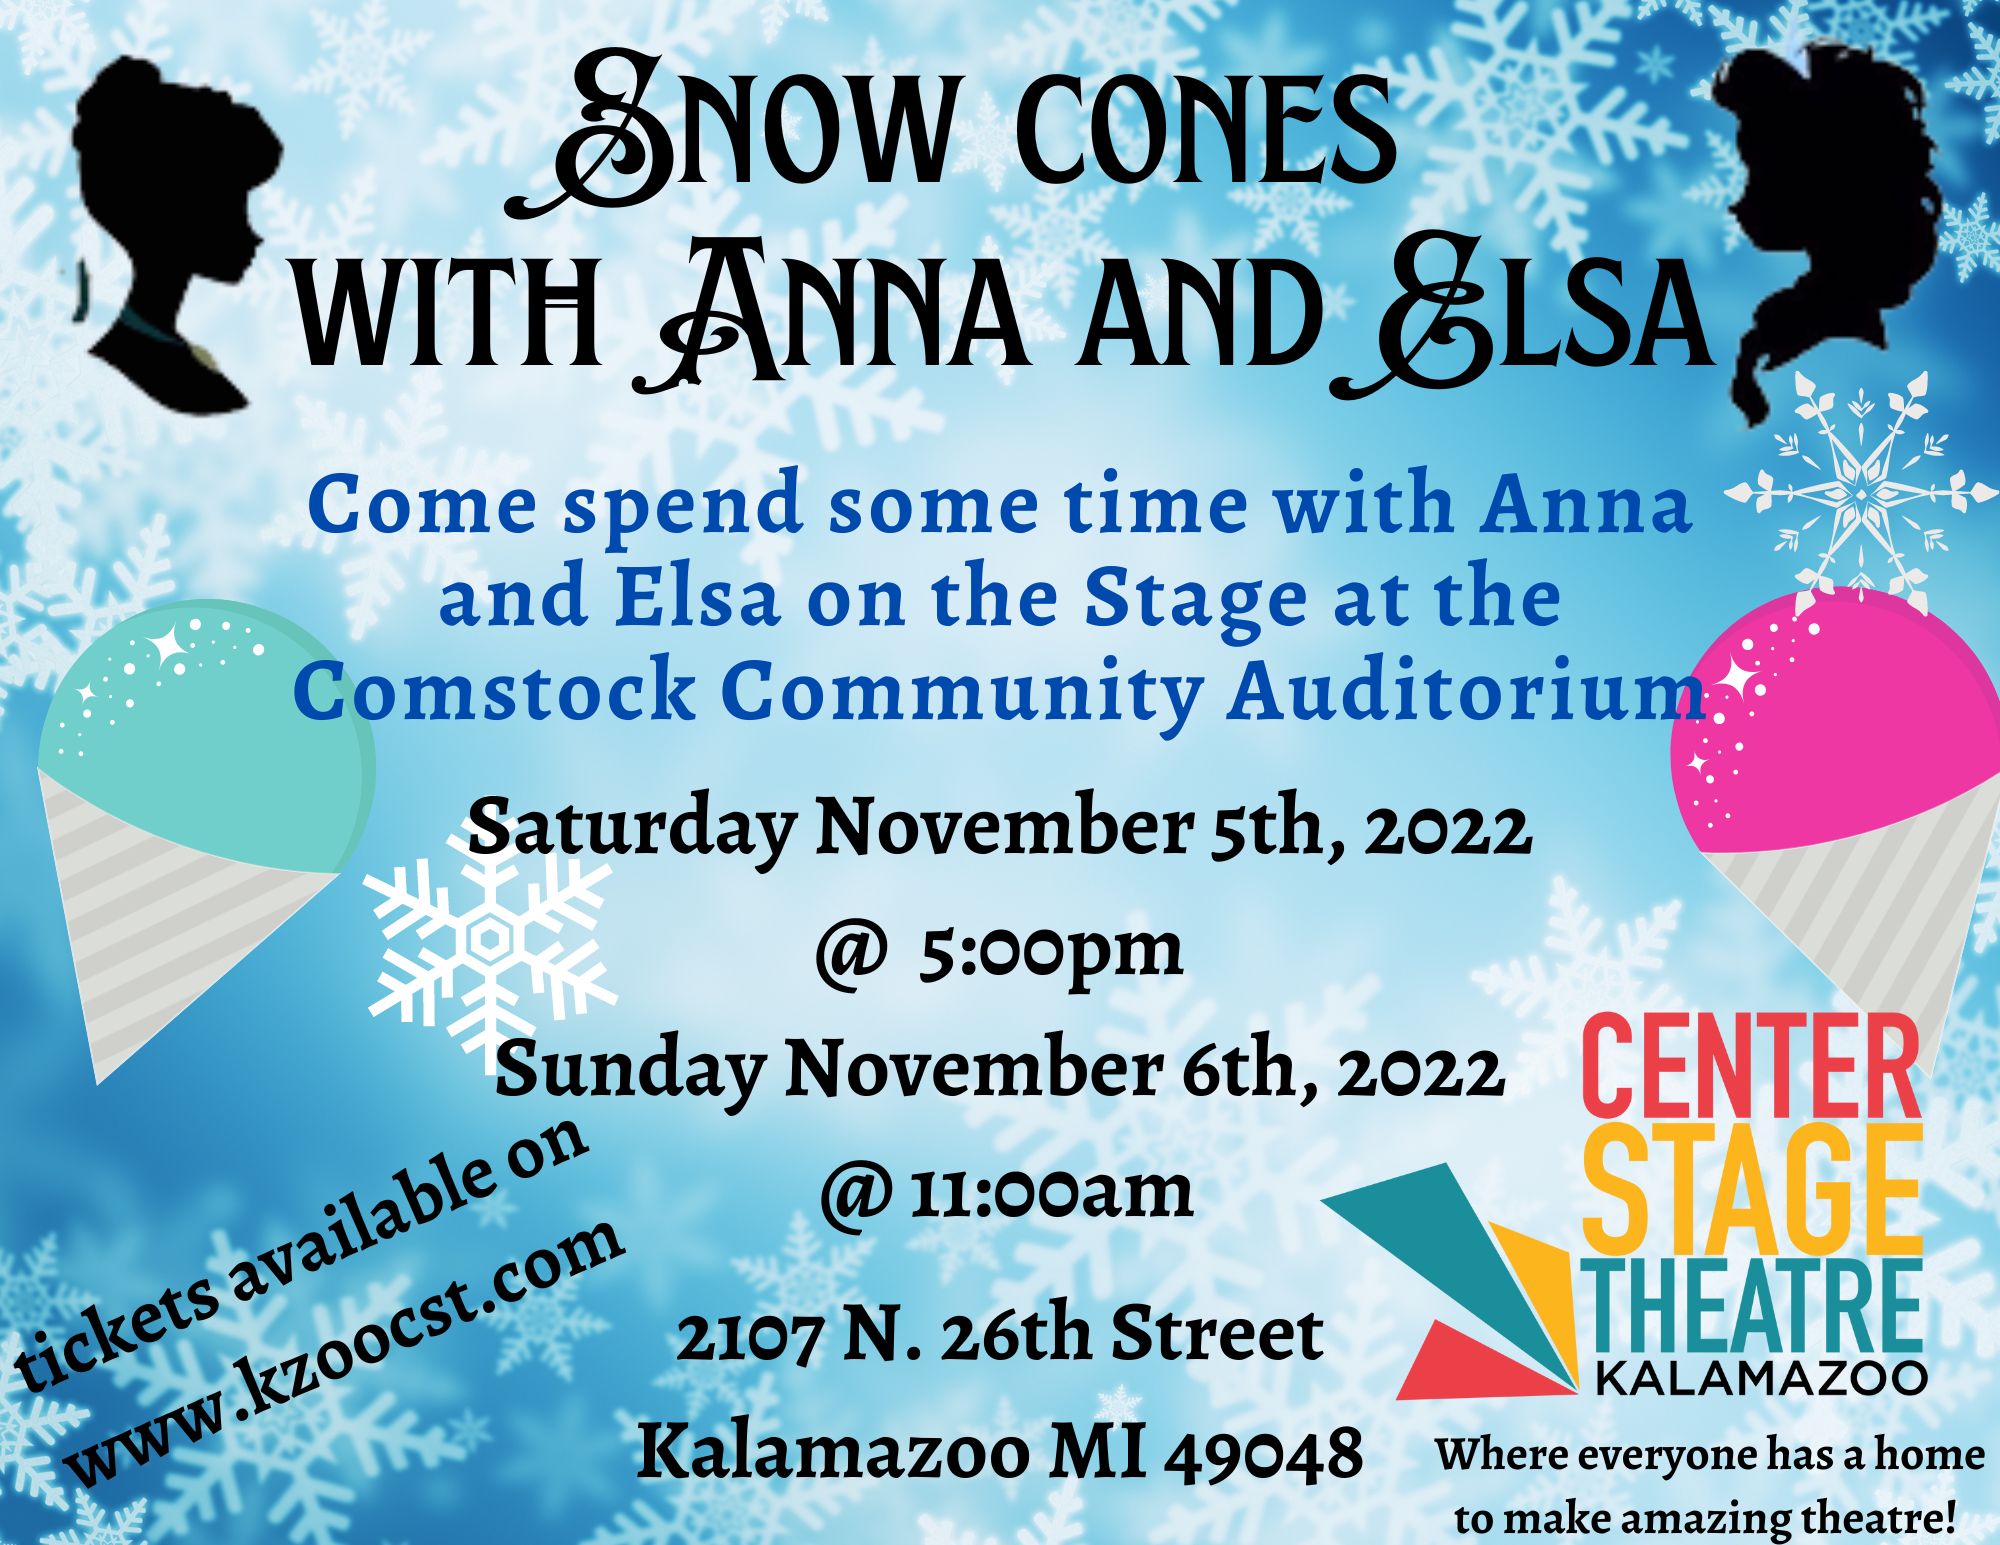 Snow Cones with Anna and Elsa